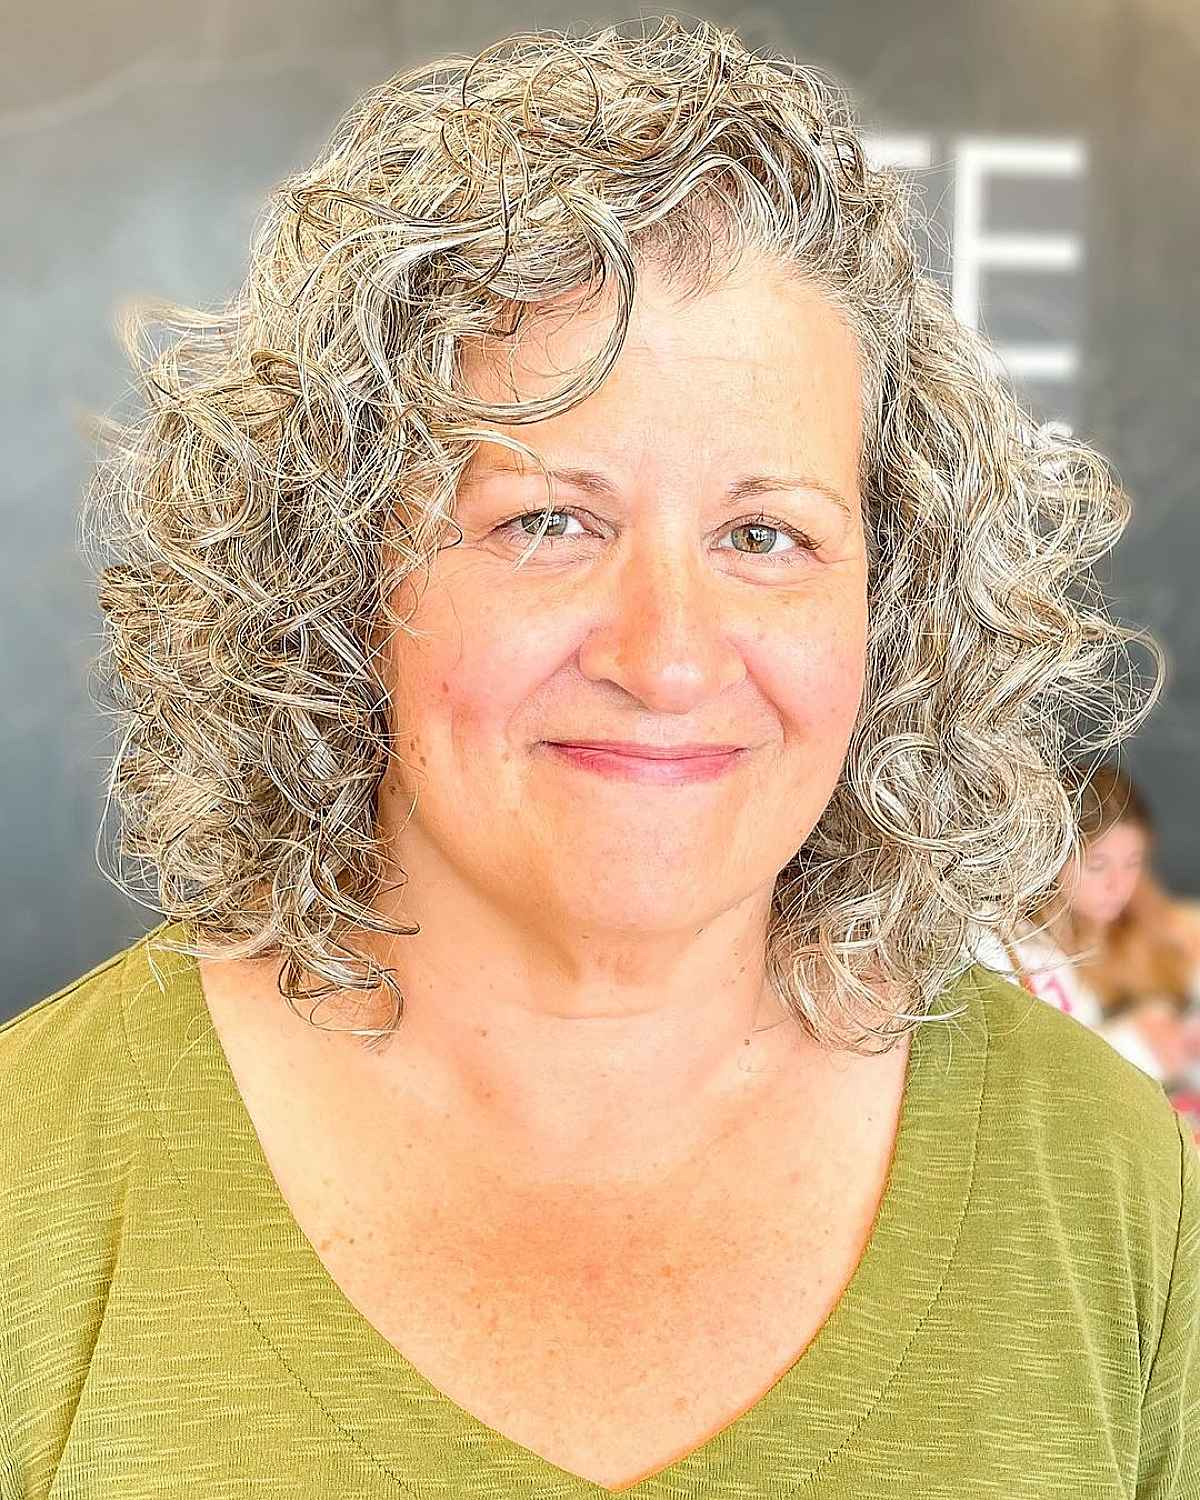 Shoulder-length haircut for ladies in their 50s with Curly Hair